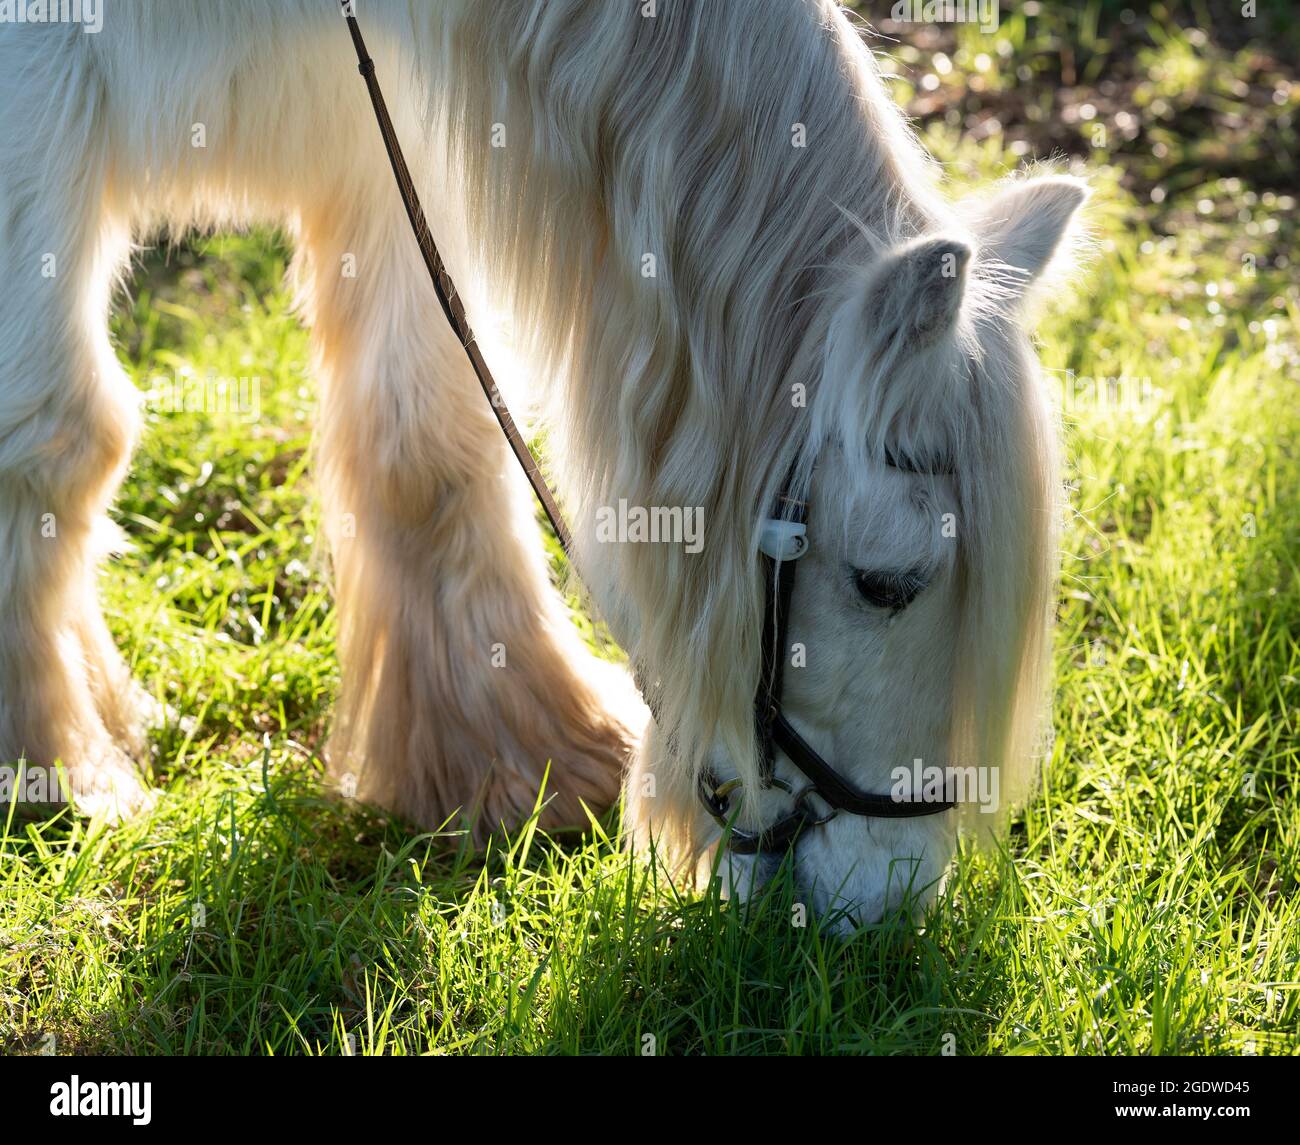 A grey horse eating grass with strong, contre jour backlighting Stock Photo